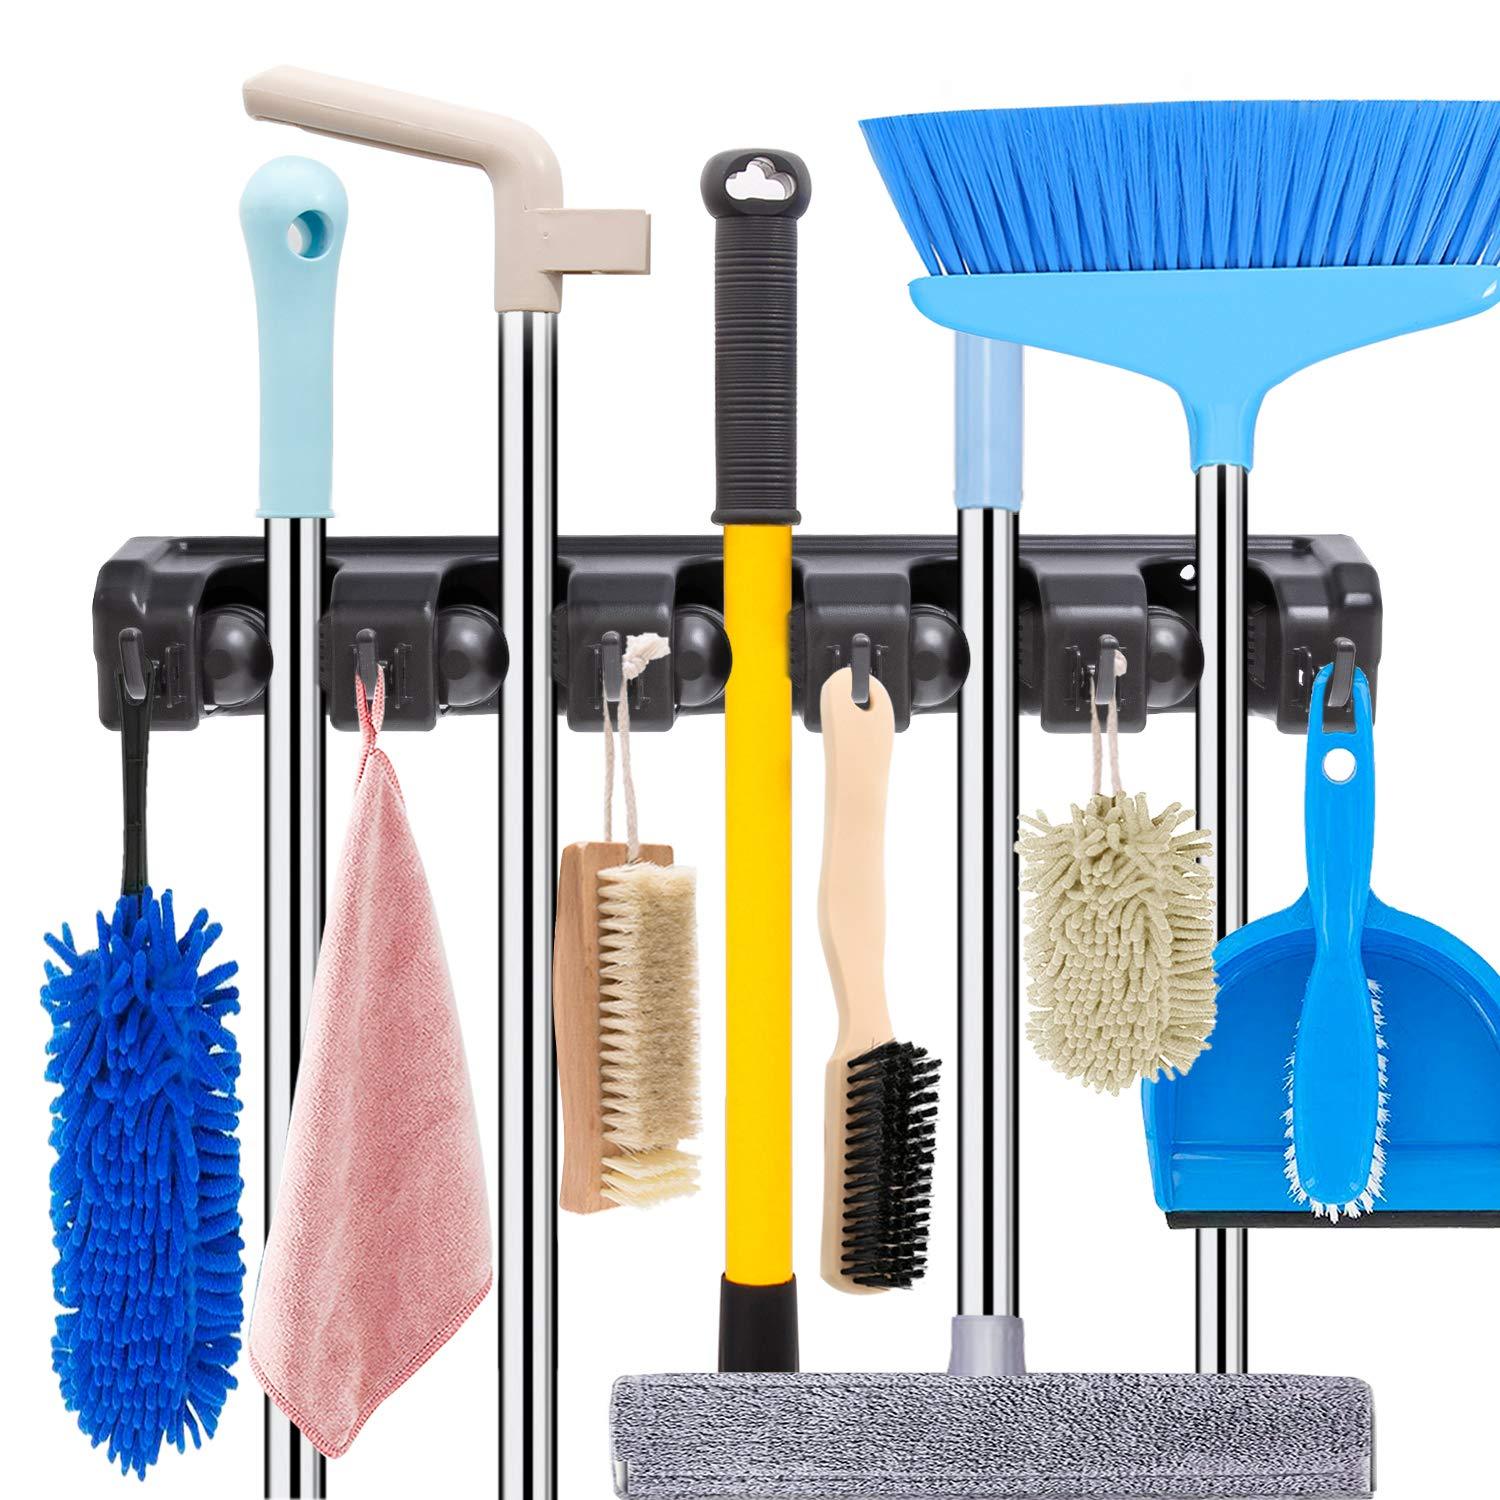 HYRIXDIRECT Wall Mount Broom Mop Holder Hanger Garden Tool Organizers Rack Garage Laundry Room Organizations and Storage with Hooks Heavy Duty - image 1 of 7